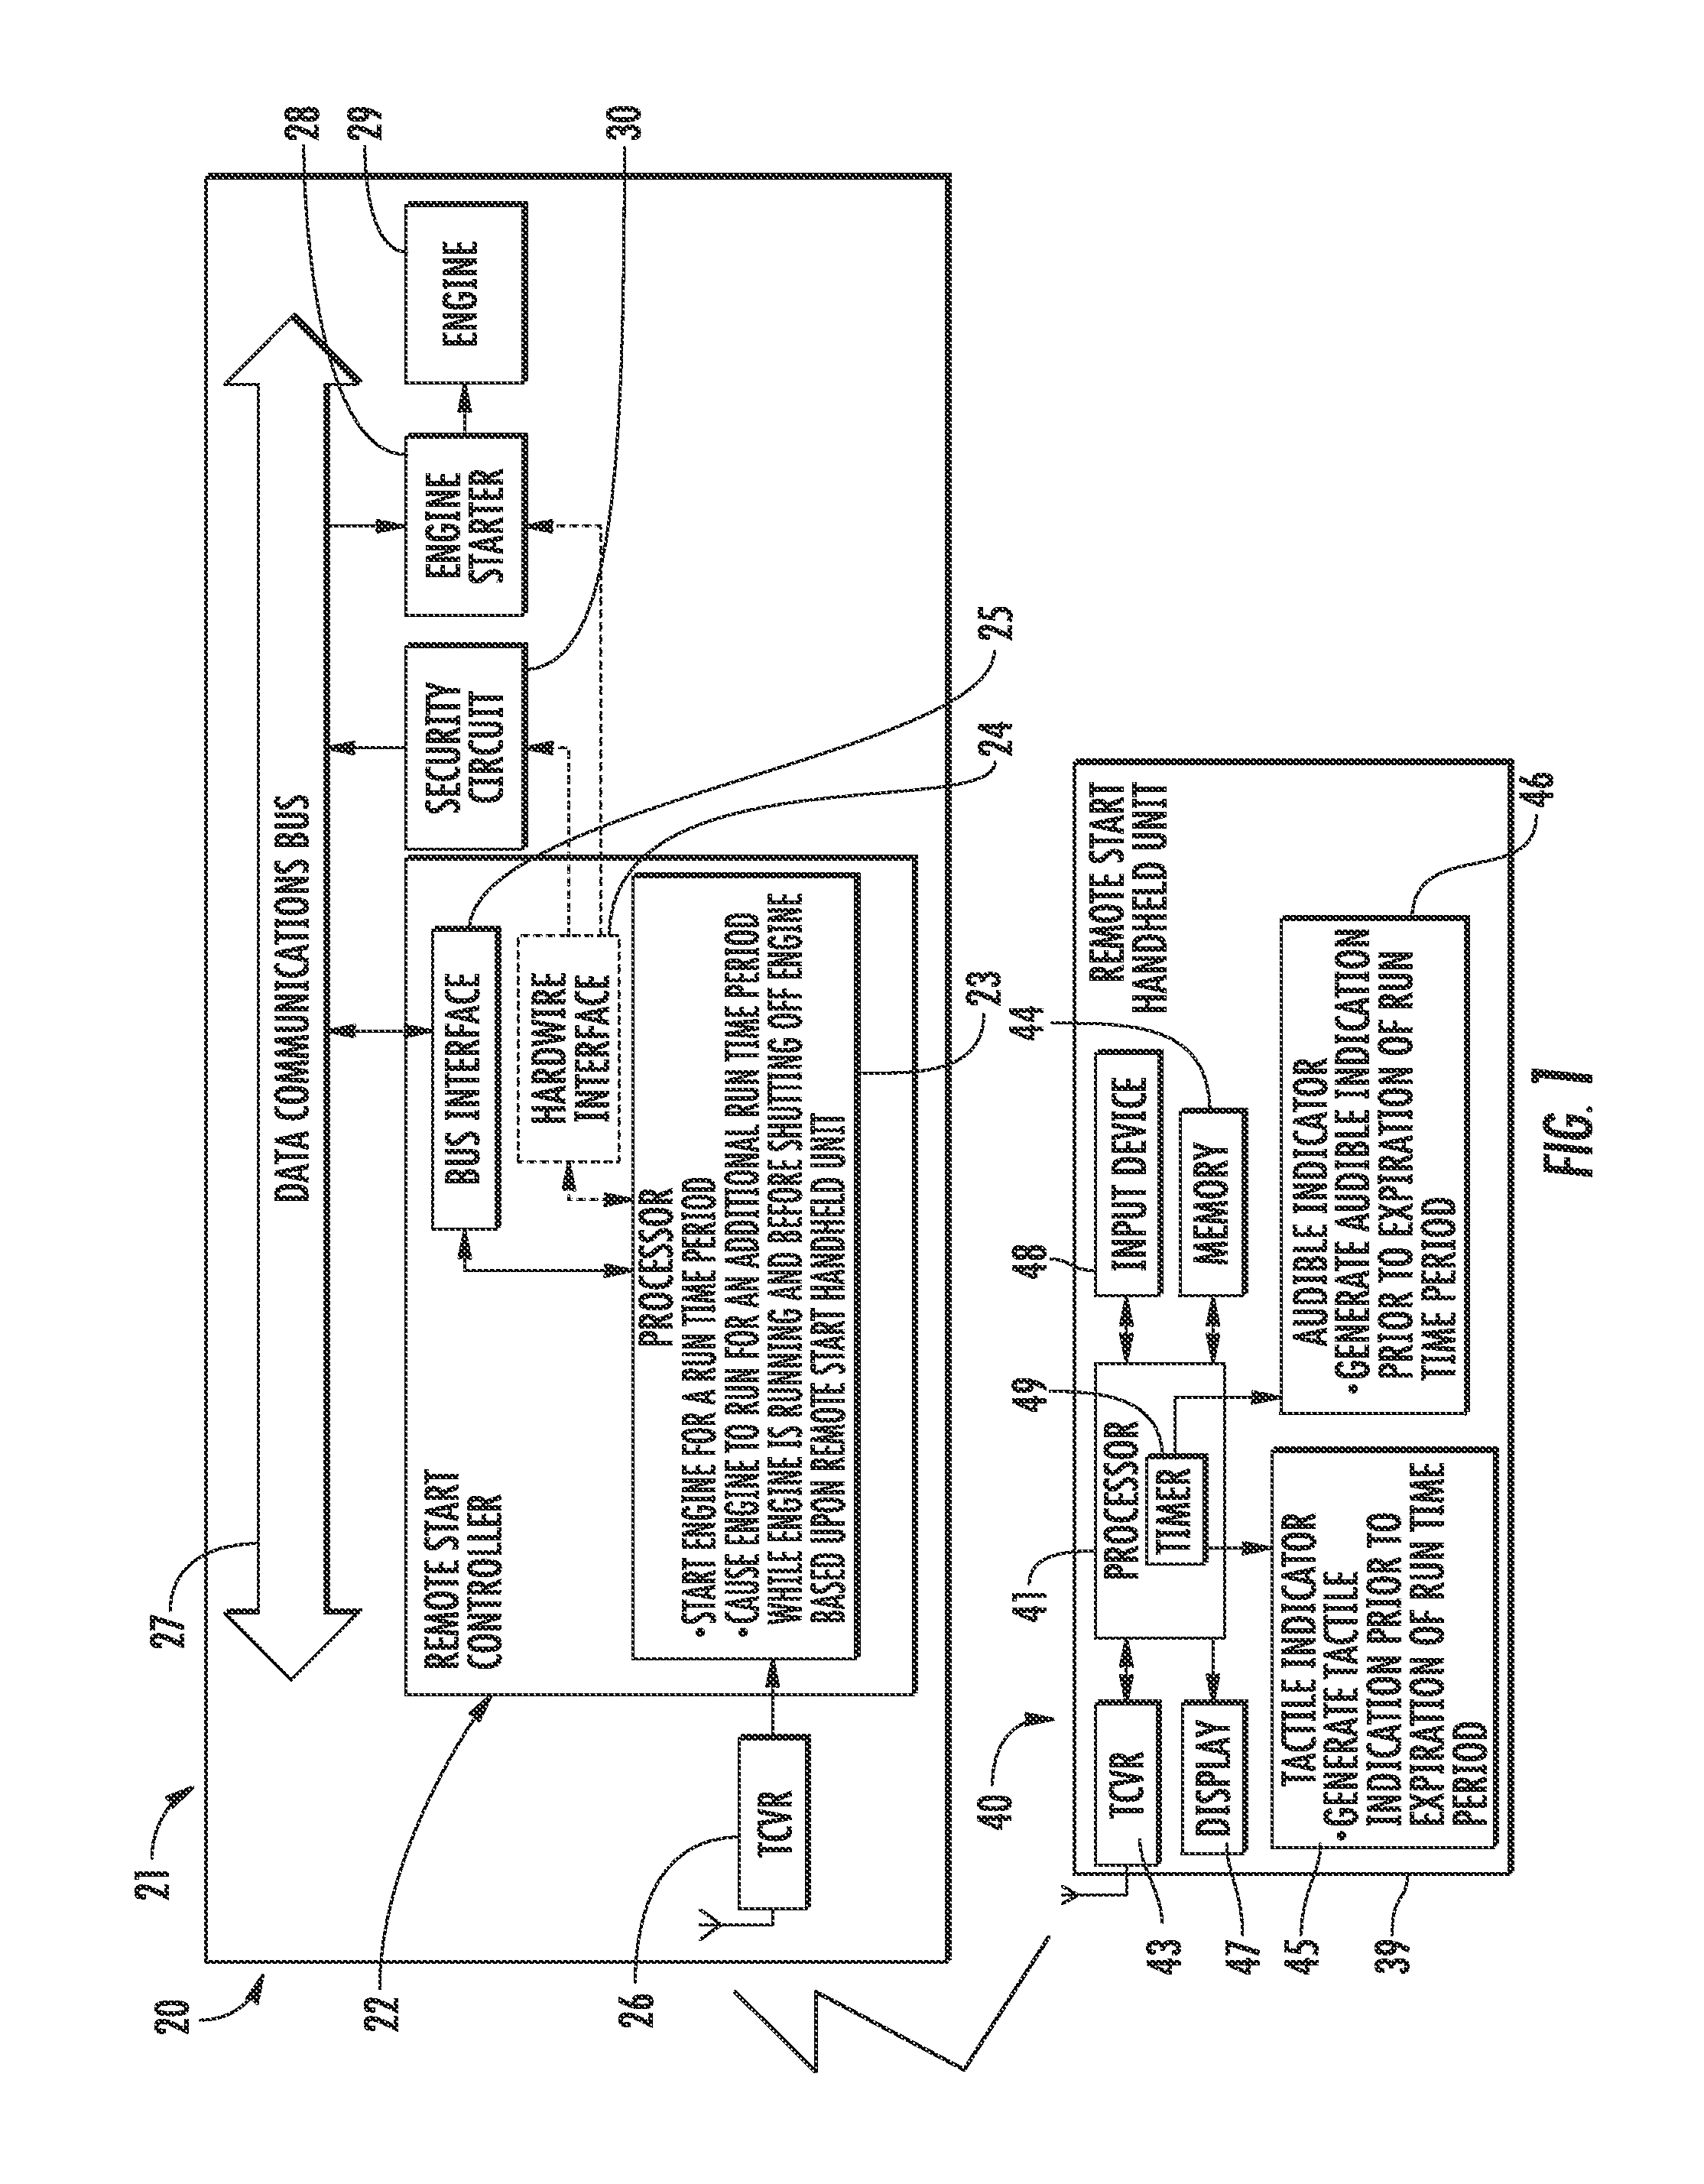 Remote vehicle starting system providing a tactile indication relating to remote starting and associated methods